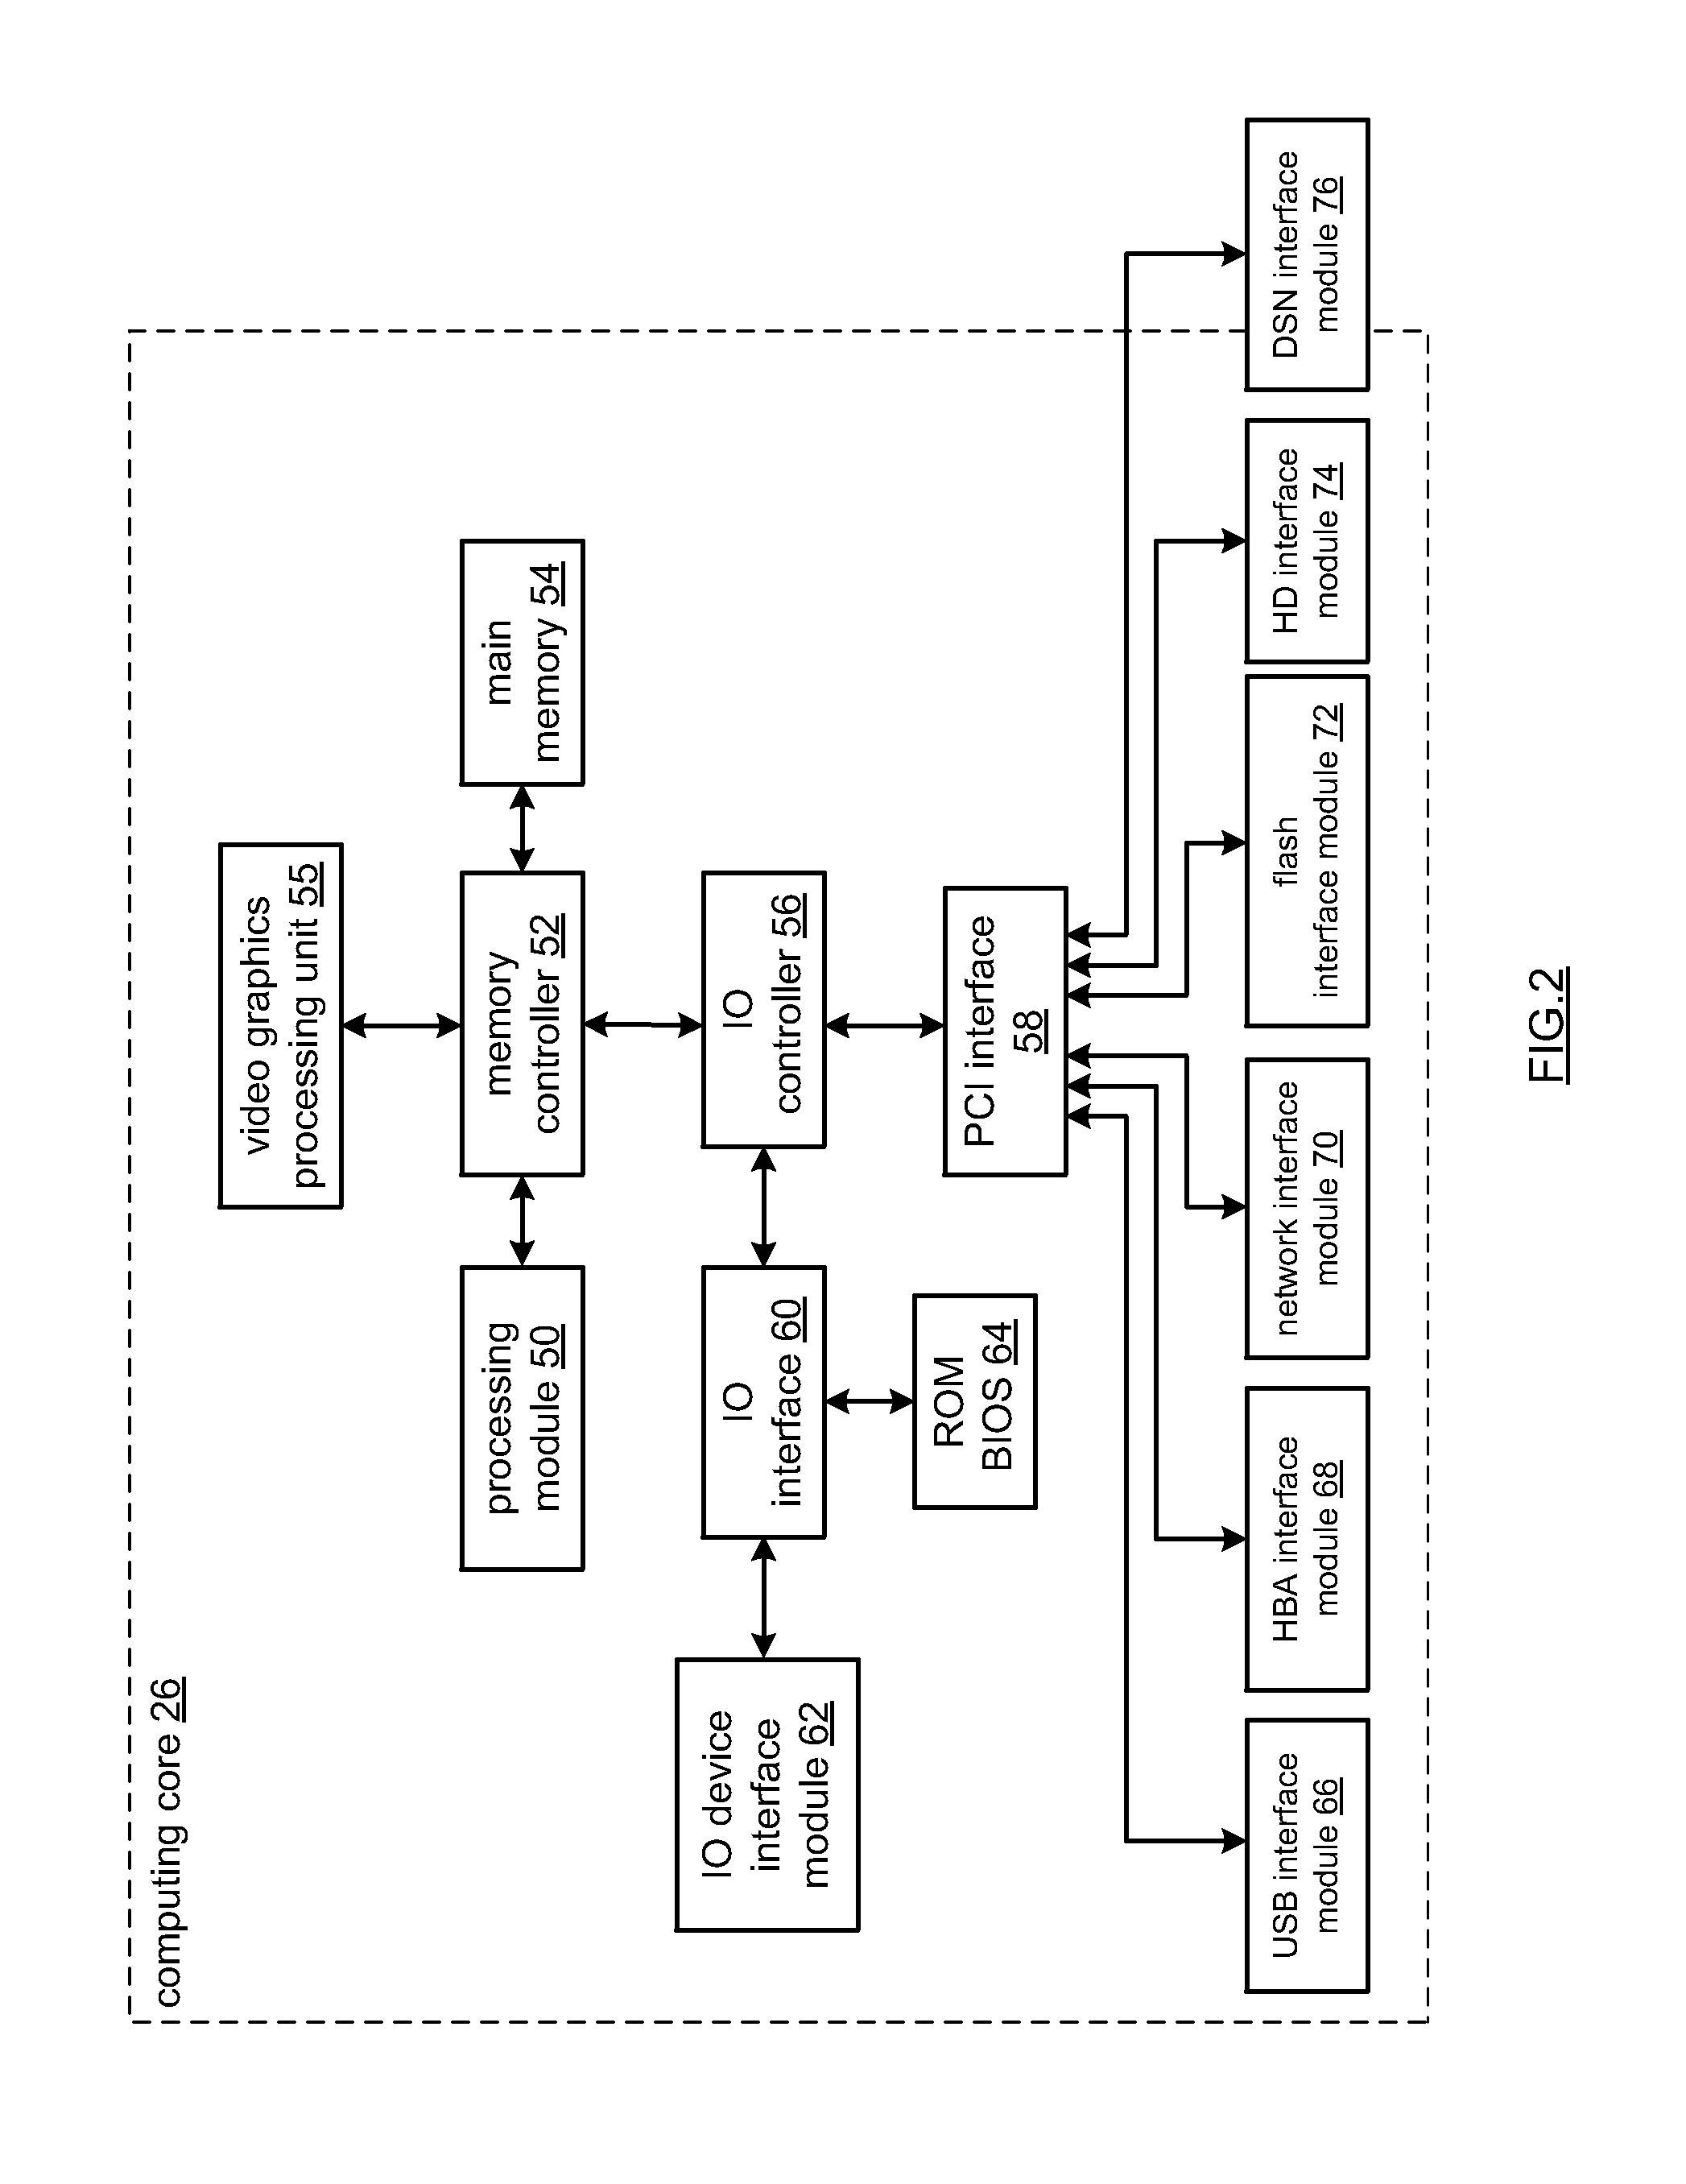 Distributed storage network for modification of a data object